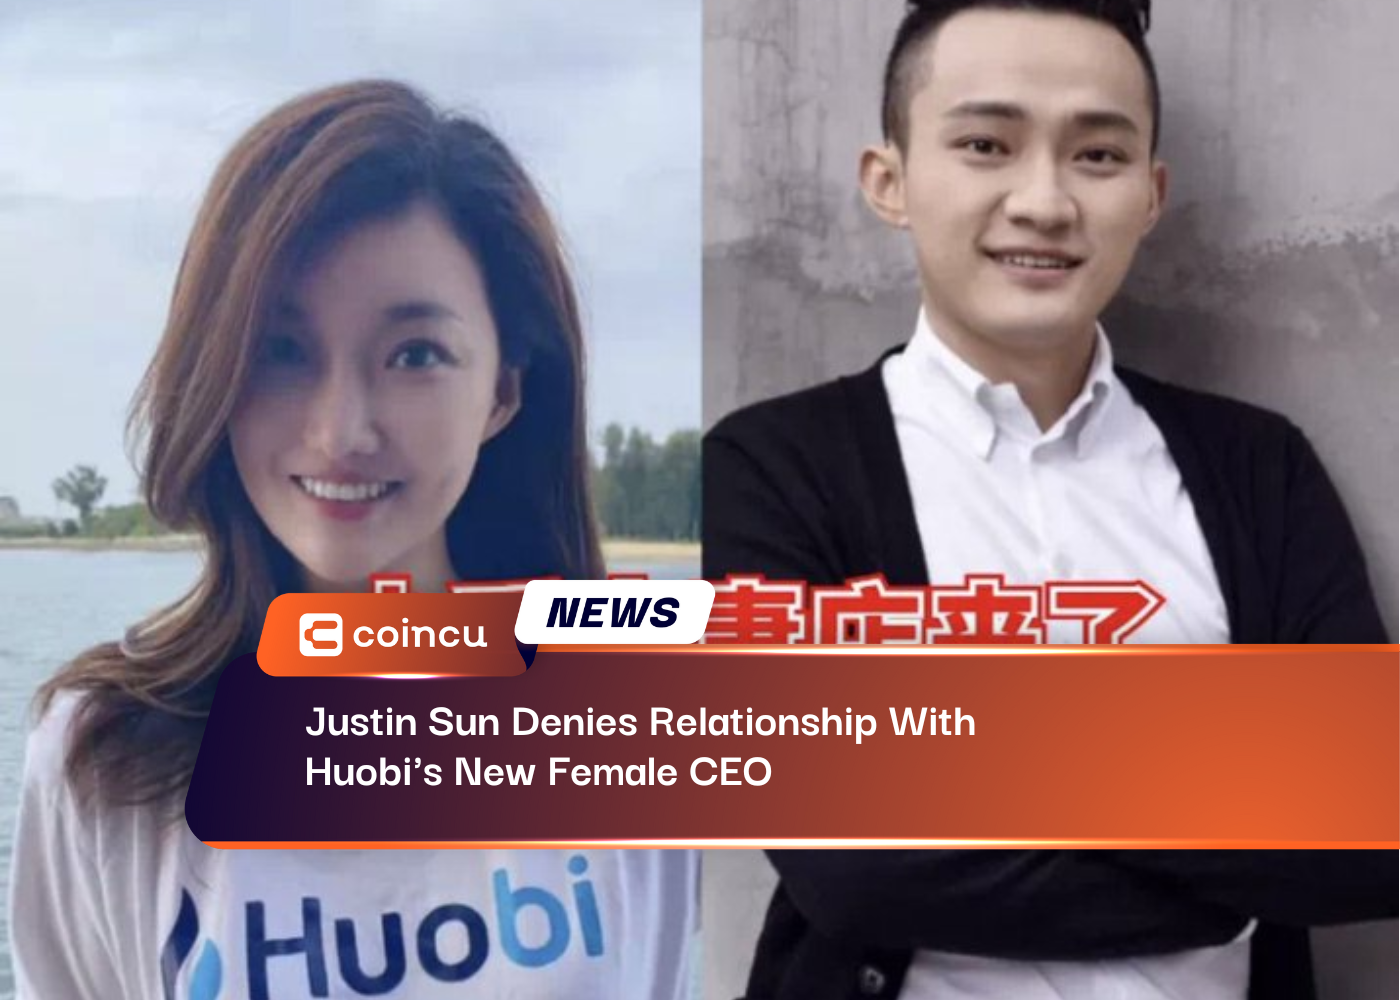 Justin Sun Denies Relationship With Huobi's New Female CEO